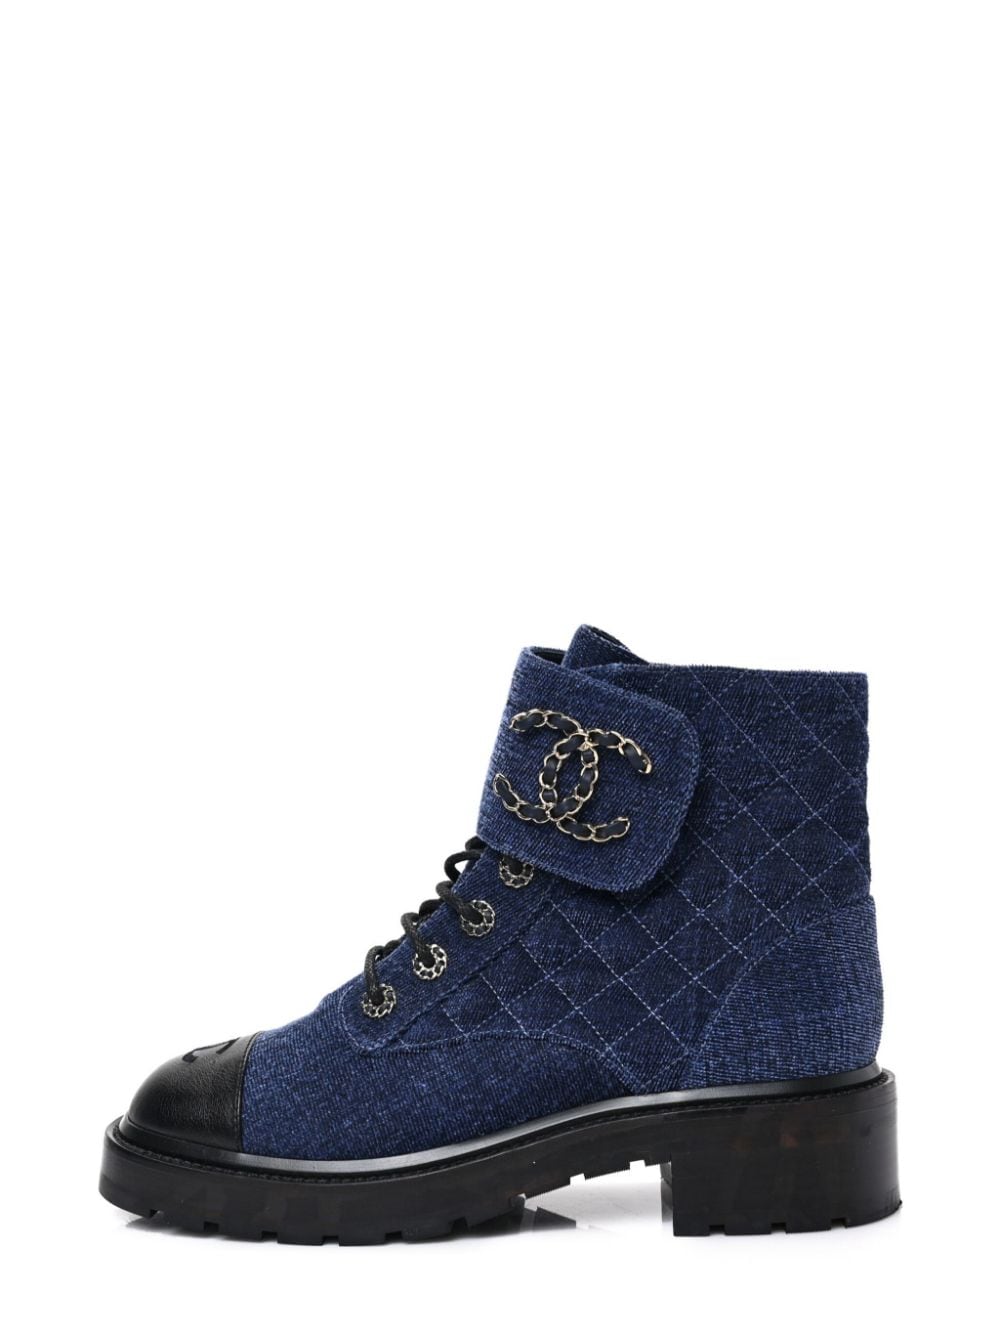 CHANEL Pre-Owned CC denim lace-up boots - Blue